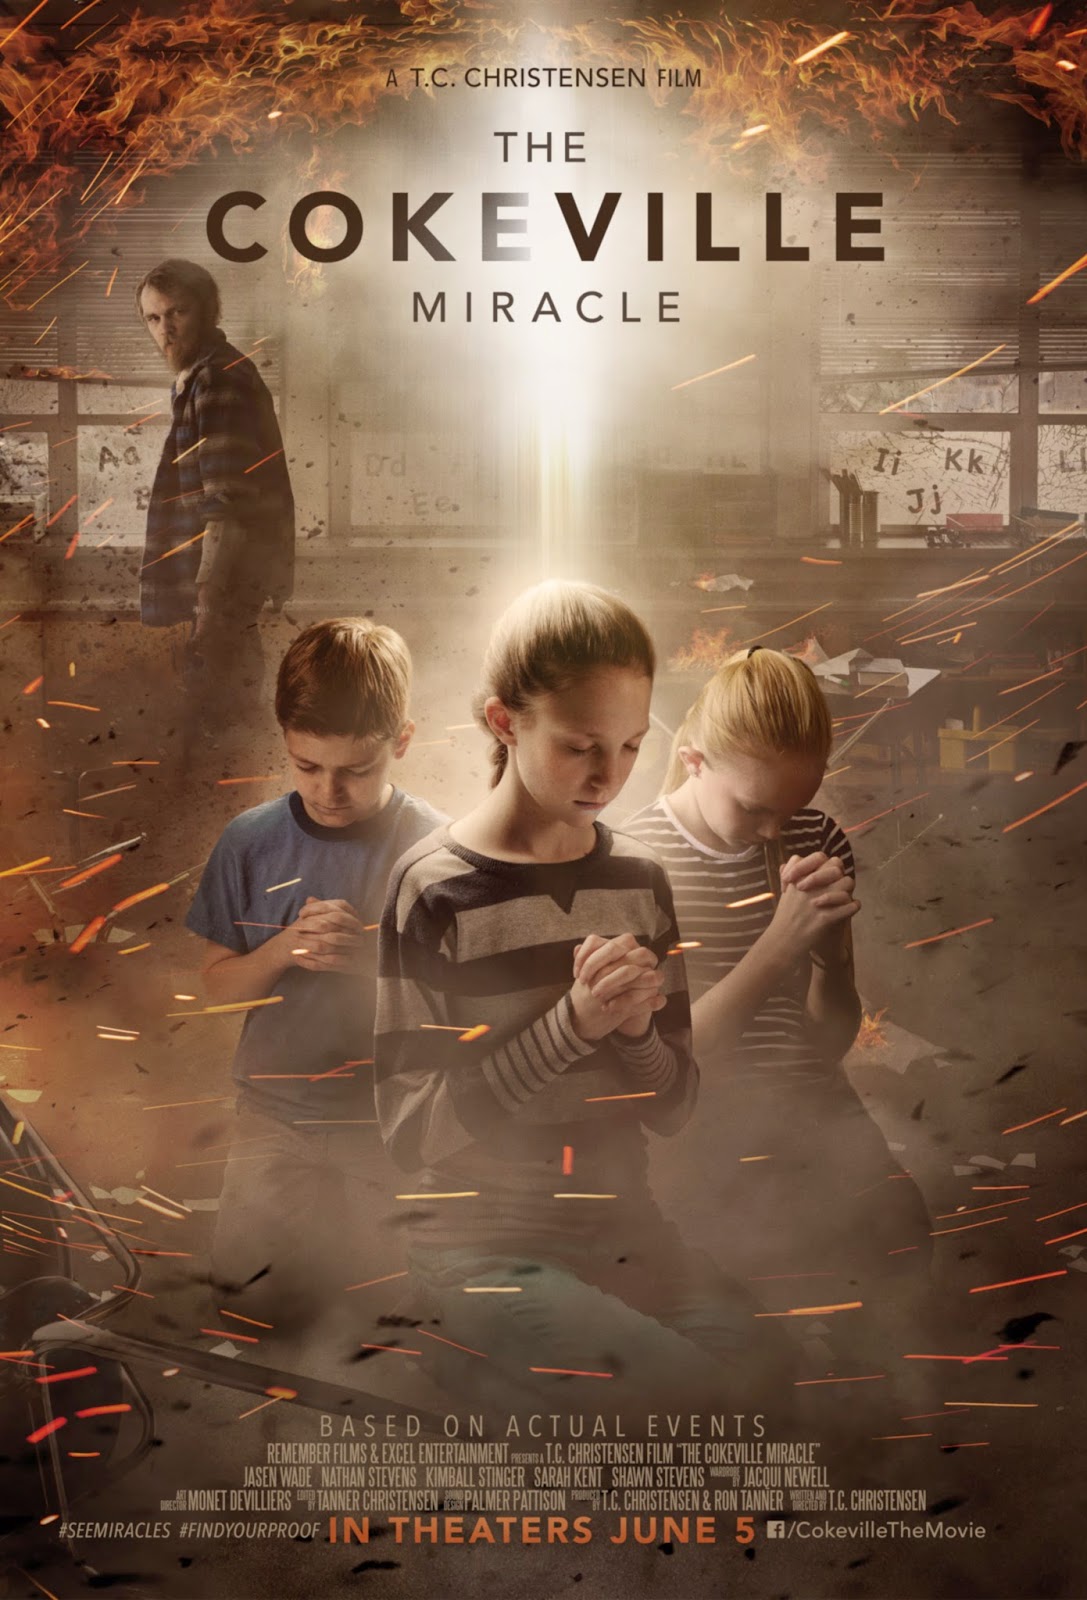 LDS and Lovin' it: MOVIE REVIEW: The Cokeville Miracle by Excel